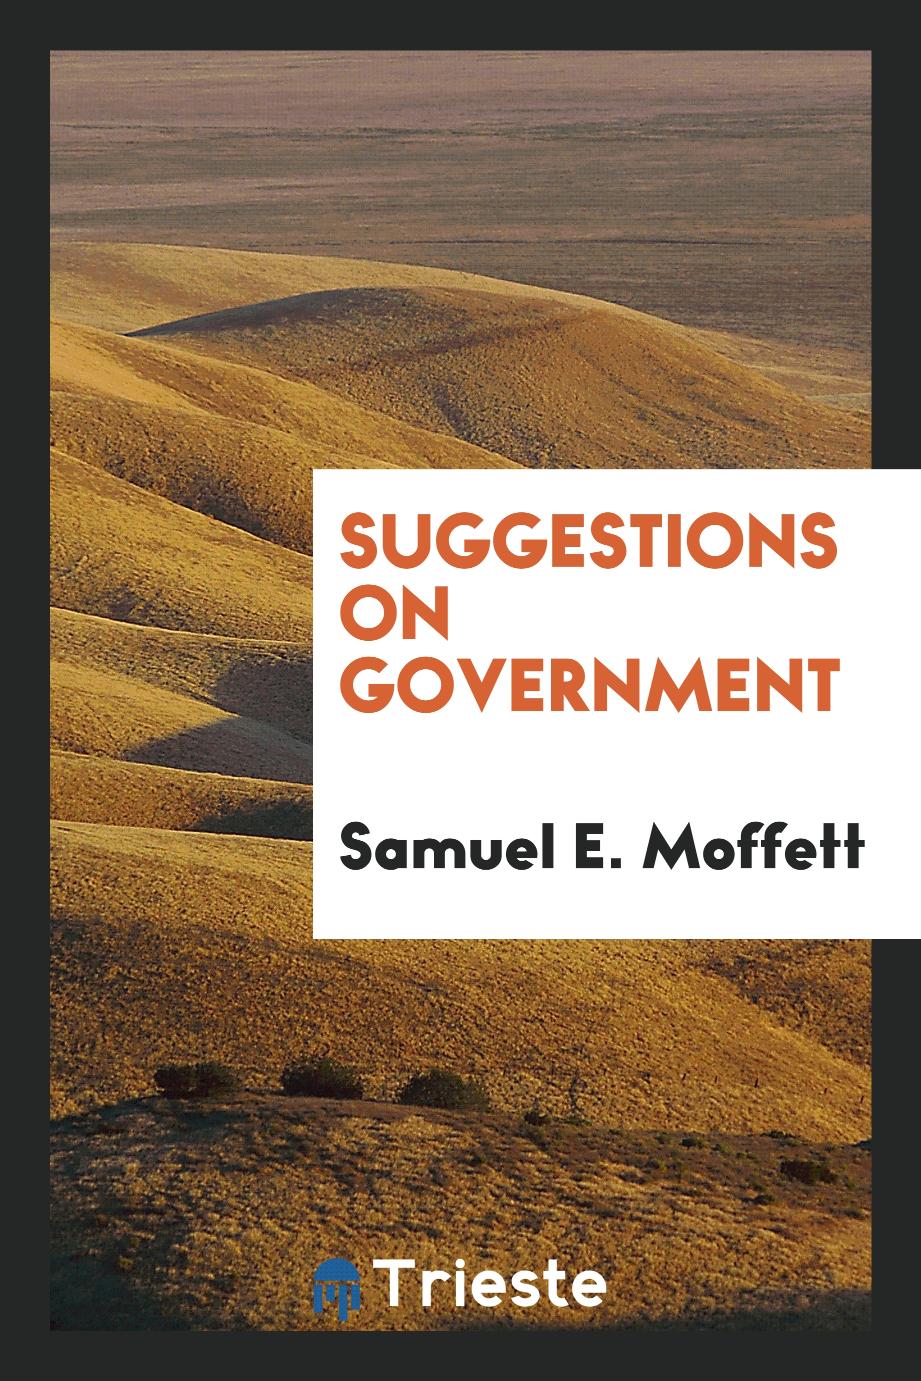 Suggestions on government